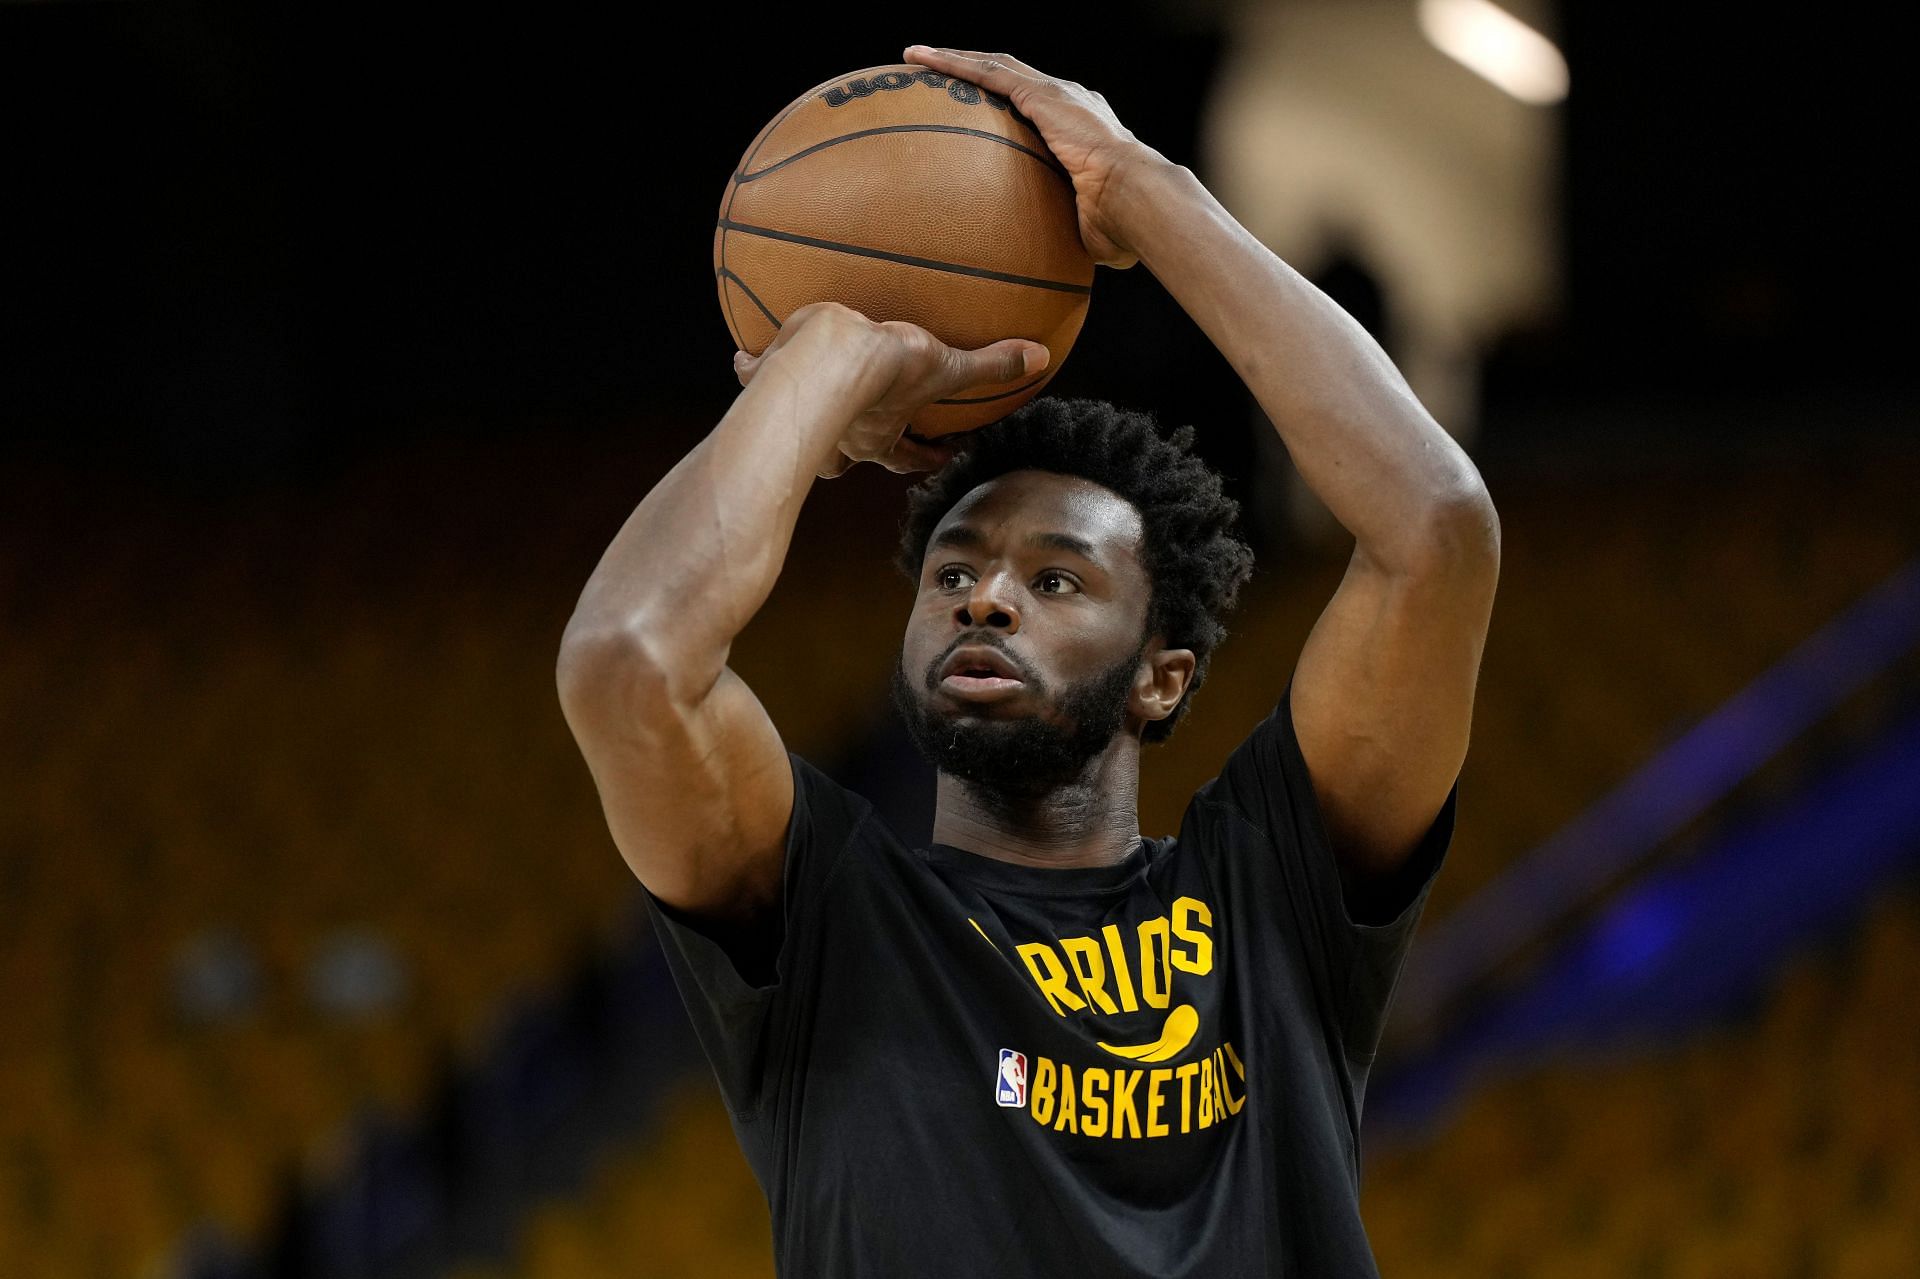 Andrew Wiggins&#039; play on both ends of the floor could be the crucial difference in the NBA Finals between the Boston Celtics and Golden State Warriors.